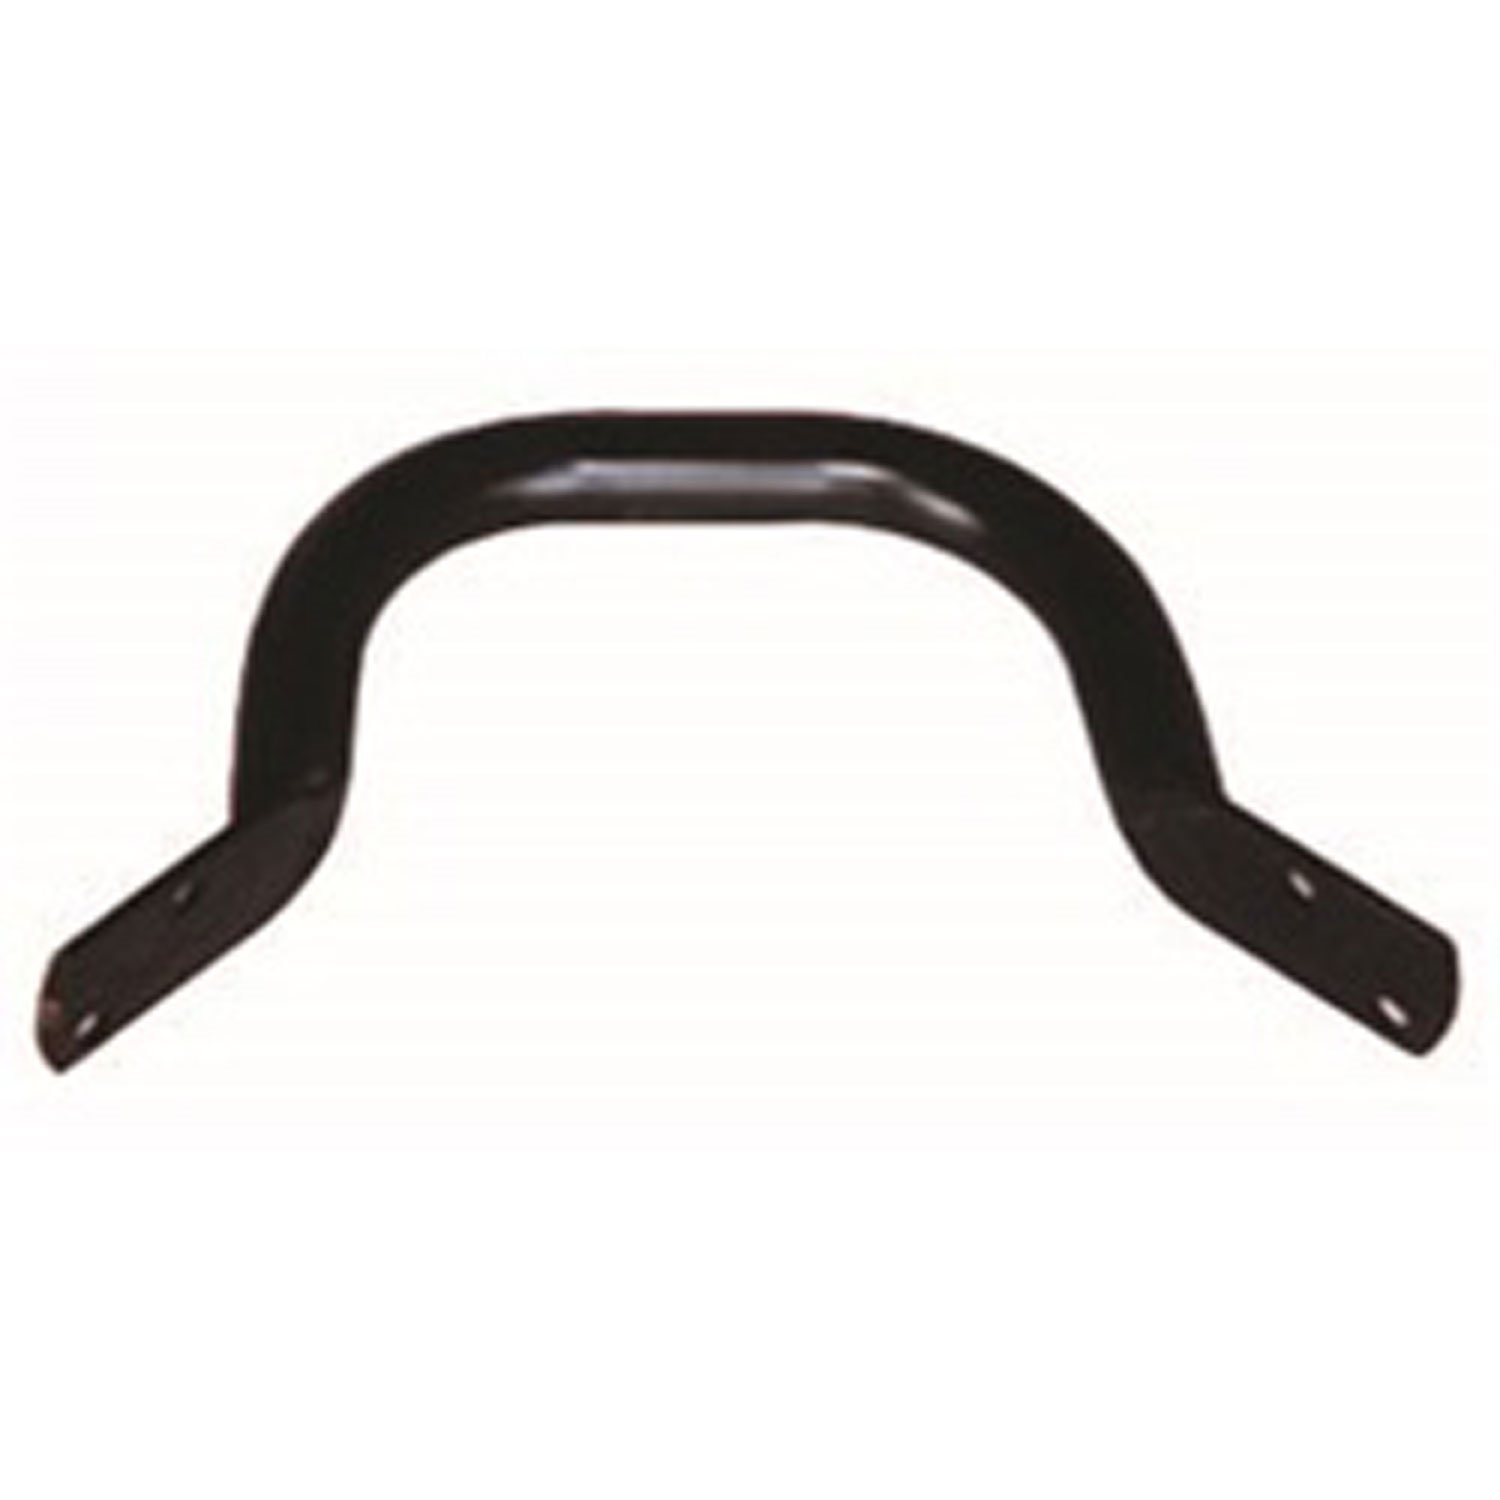 Body Lift Handle Rear 1941-1945 MB and Ford GPW Mounts on Rear Corners 2 Required